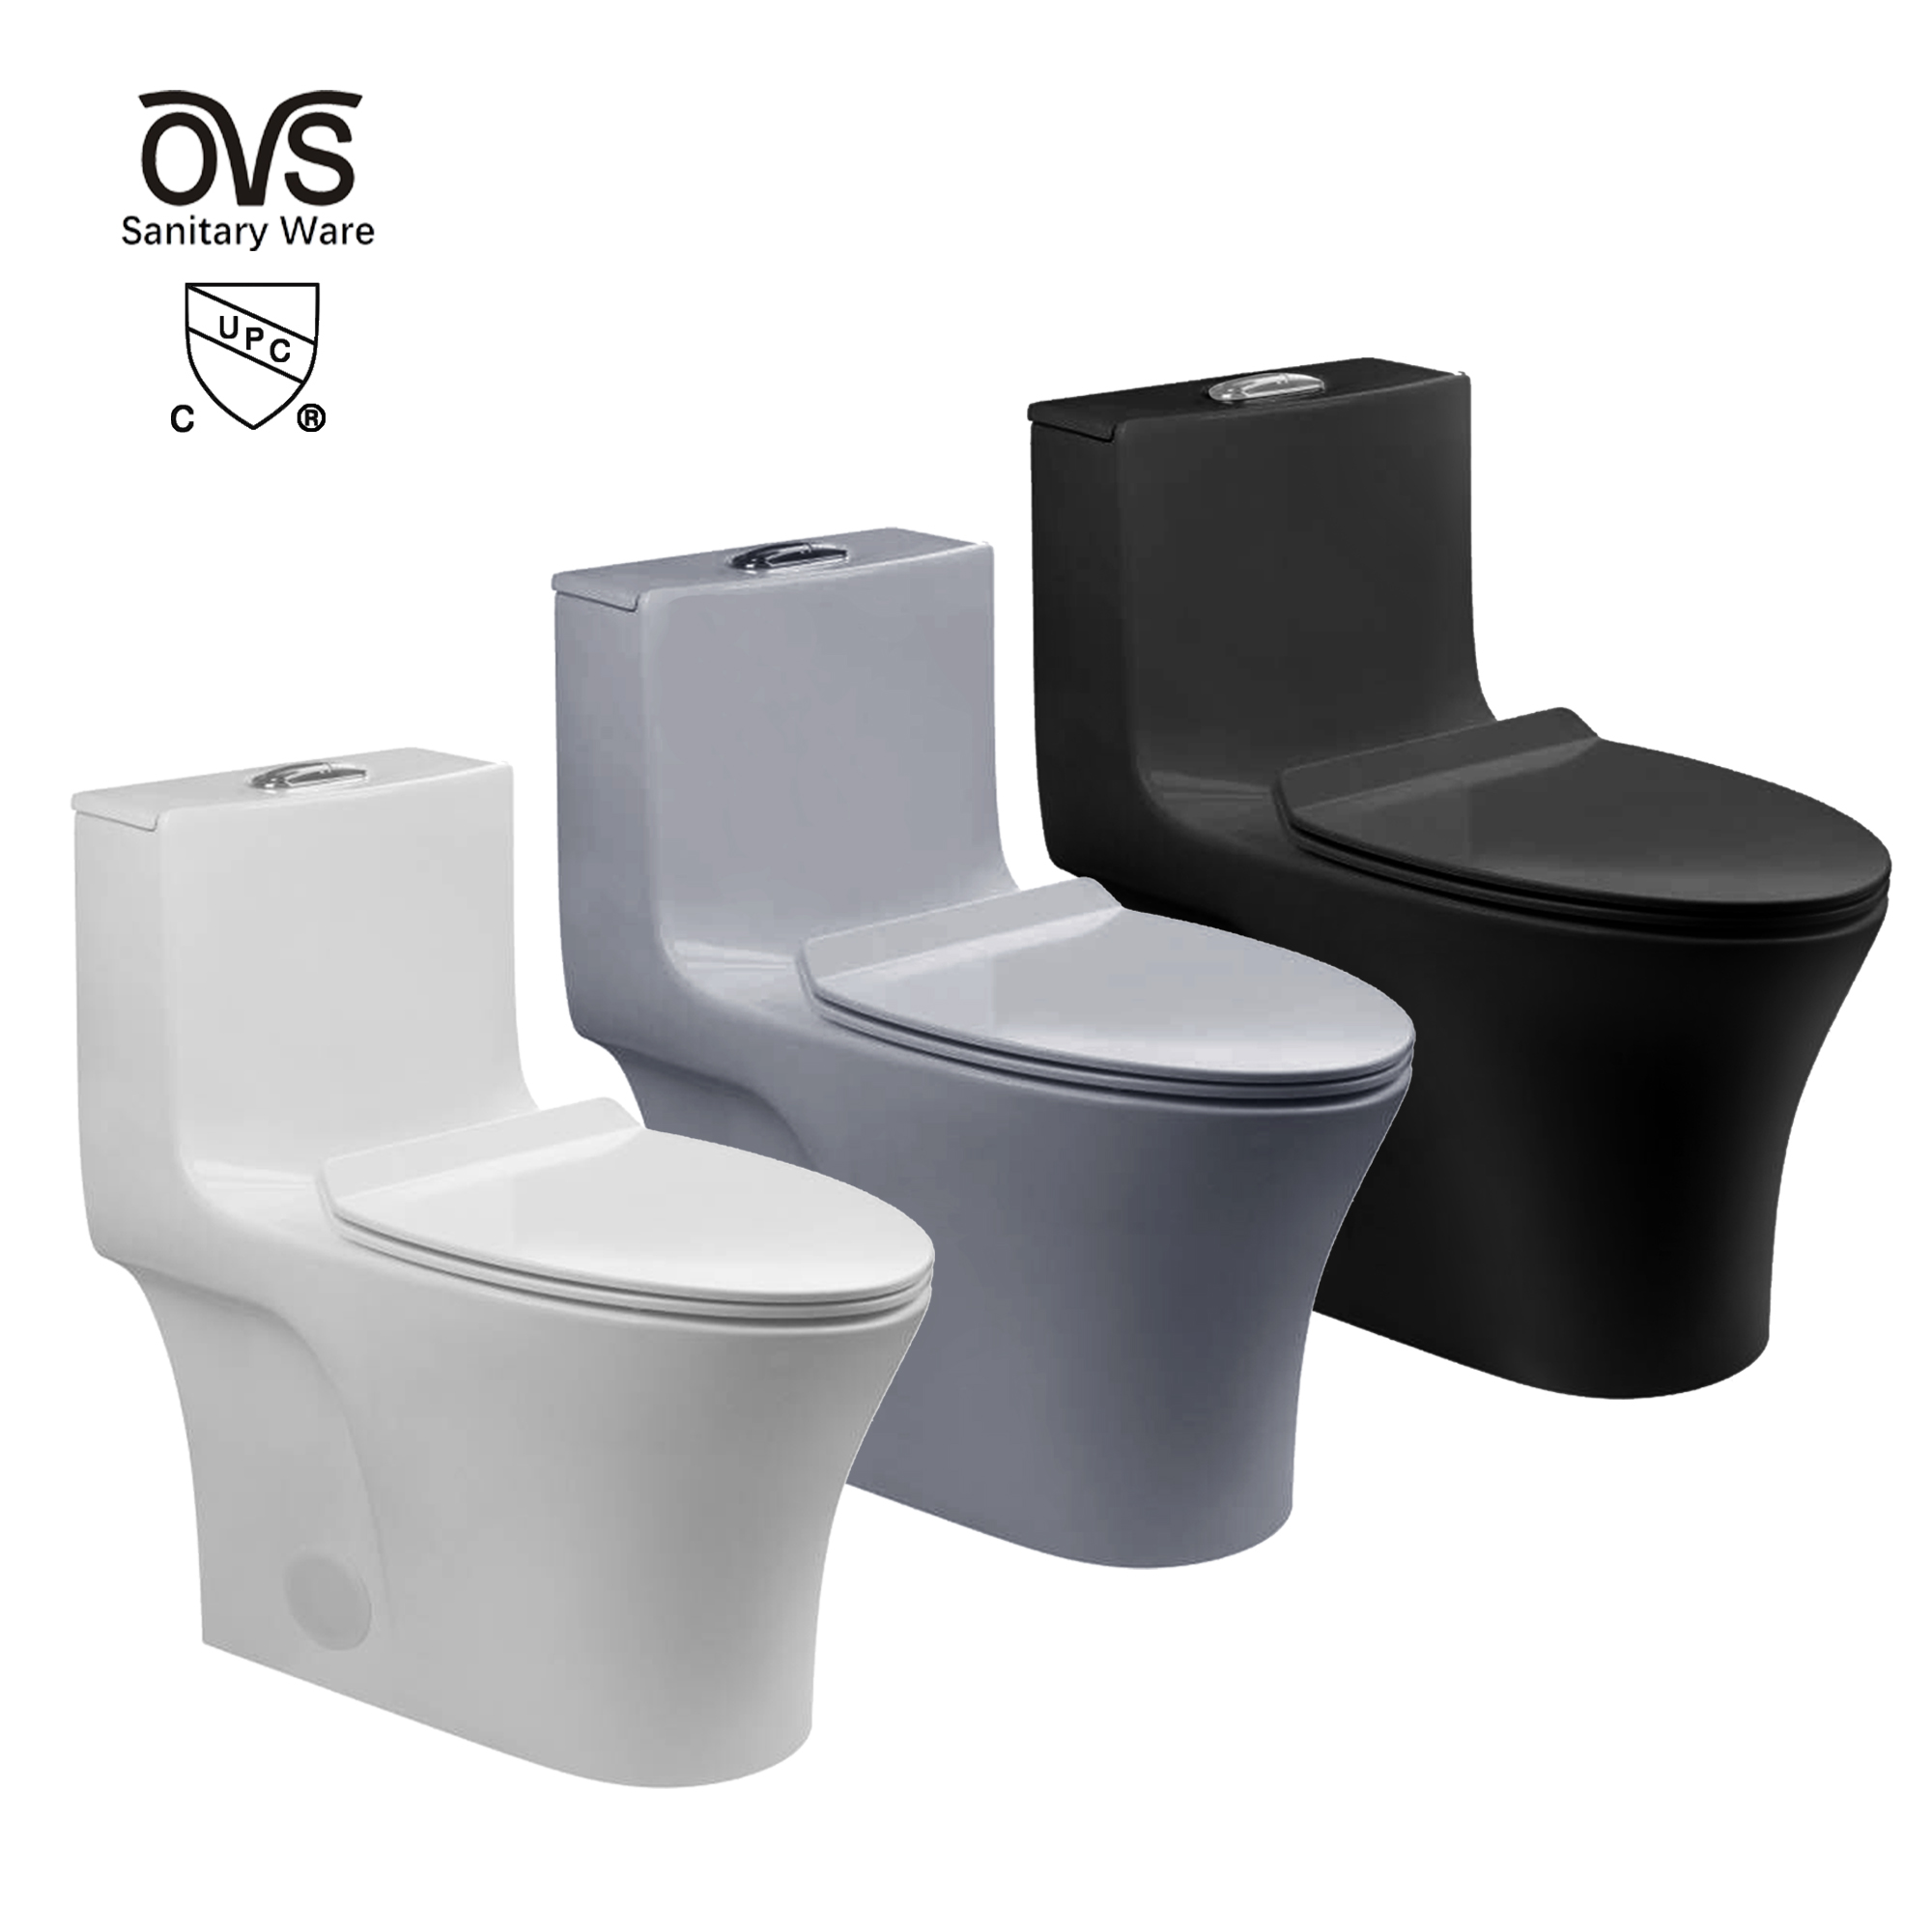 Water Closet Ceramic Commode Toilet Bowl Wc Gray Black Color One Piece Toilet